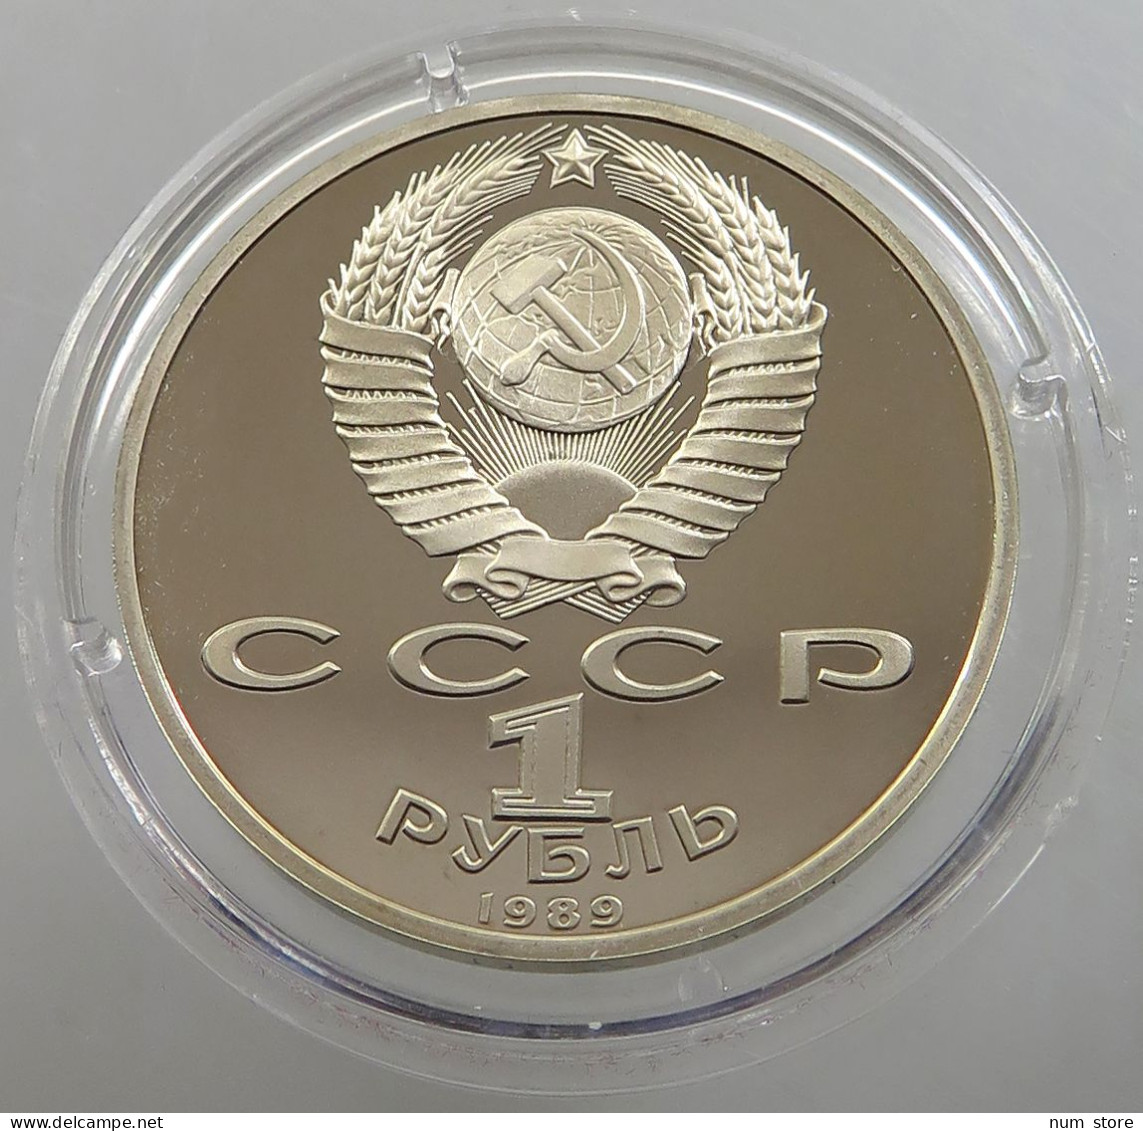 RUSSIA USSR 1 ROUBLE 1989 LERMONTOV PROOF #sm14 0475 - Russia